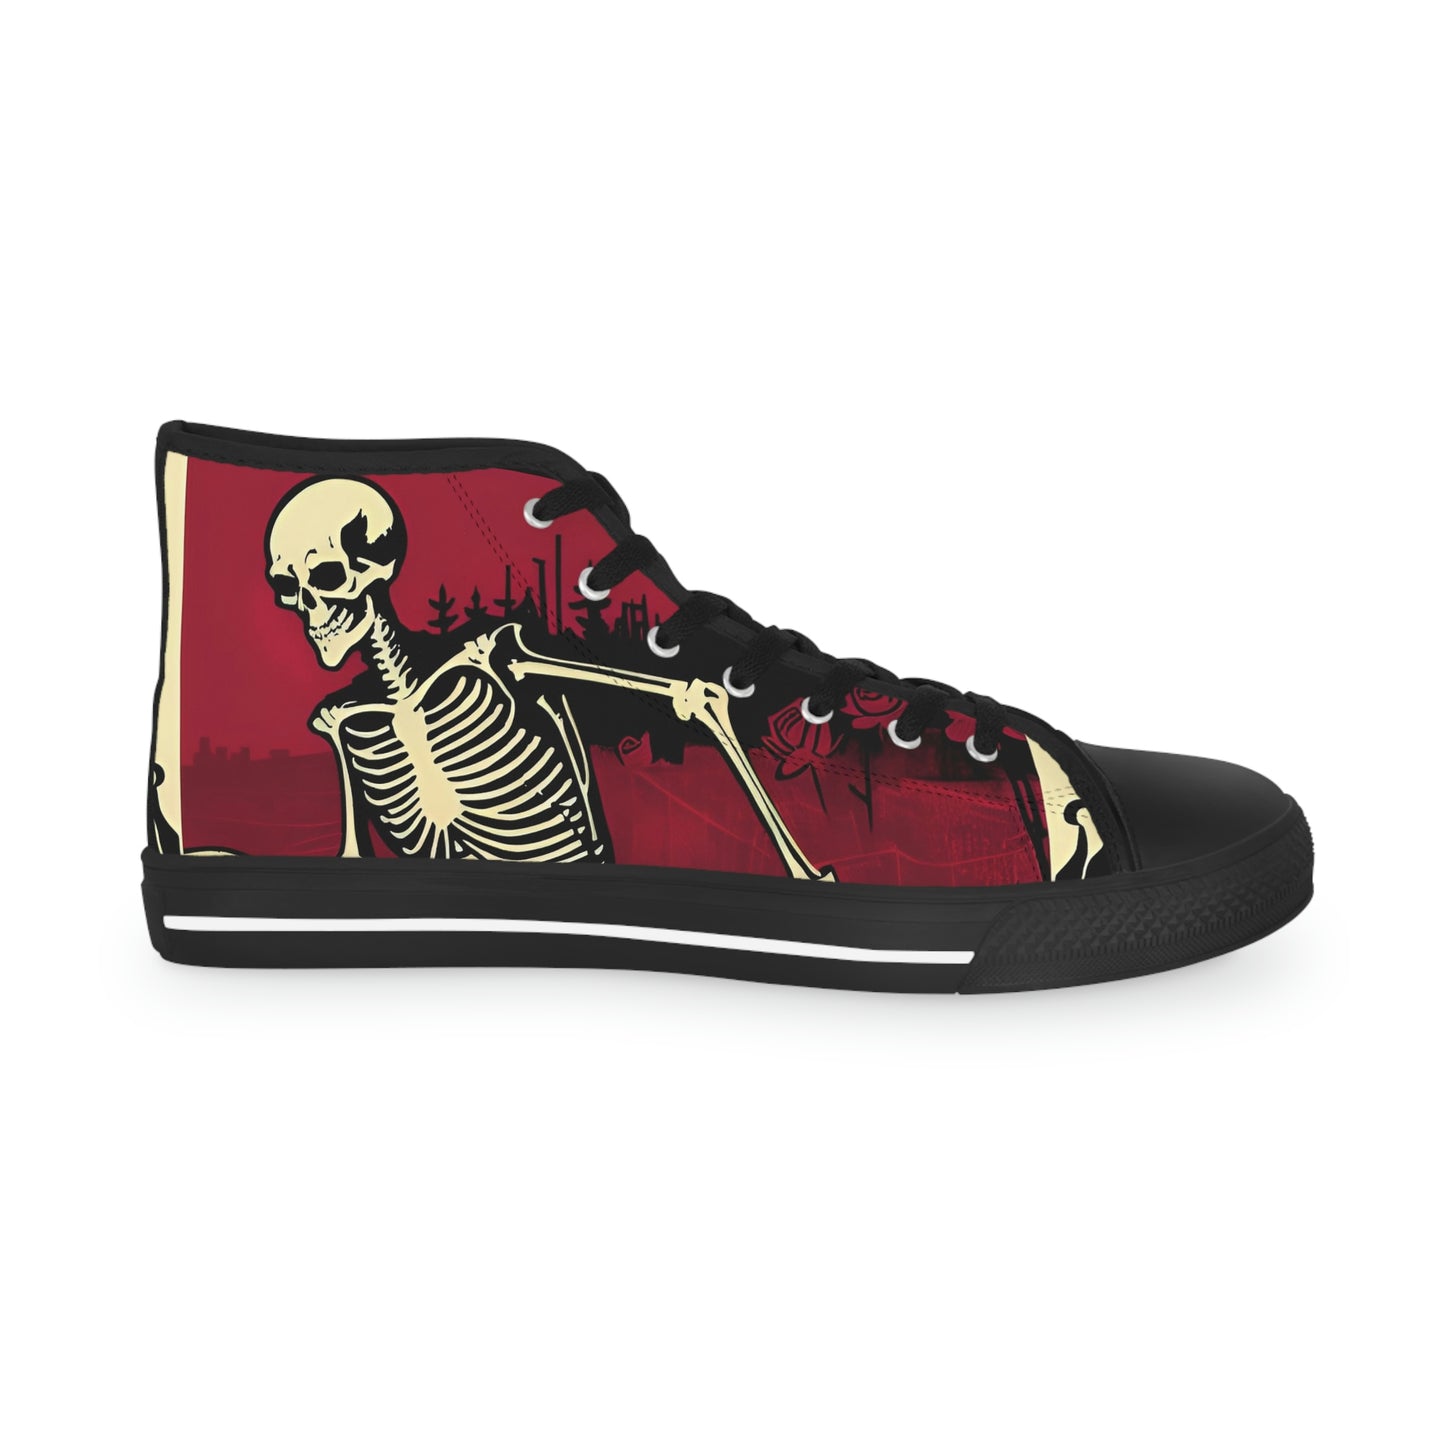 Right outside view of Skelly Jacks design canvas sneakers with black laces.